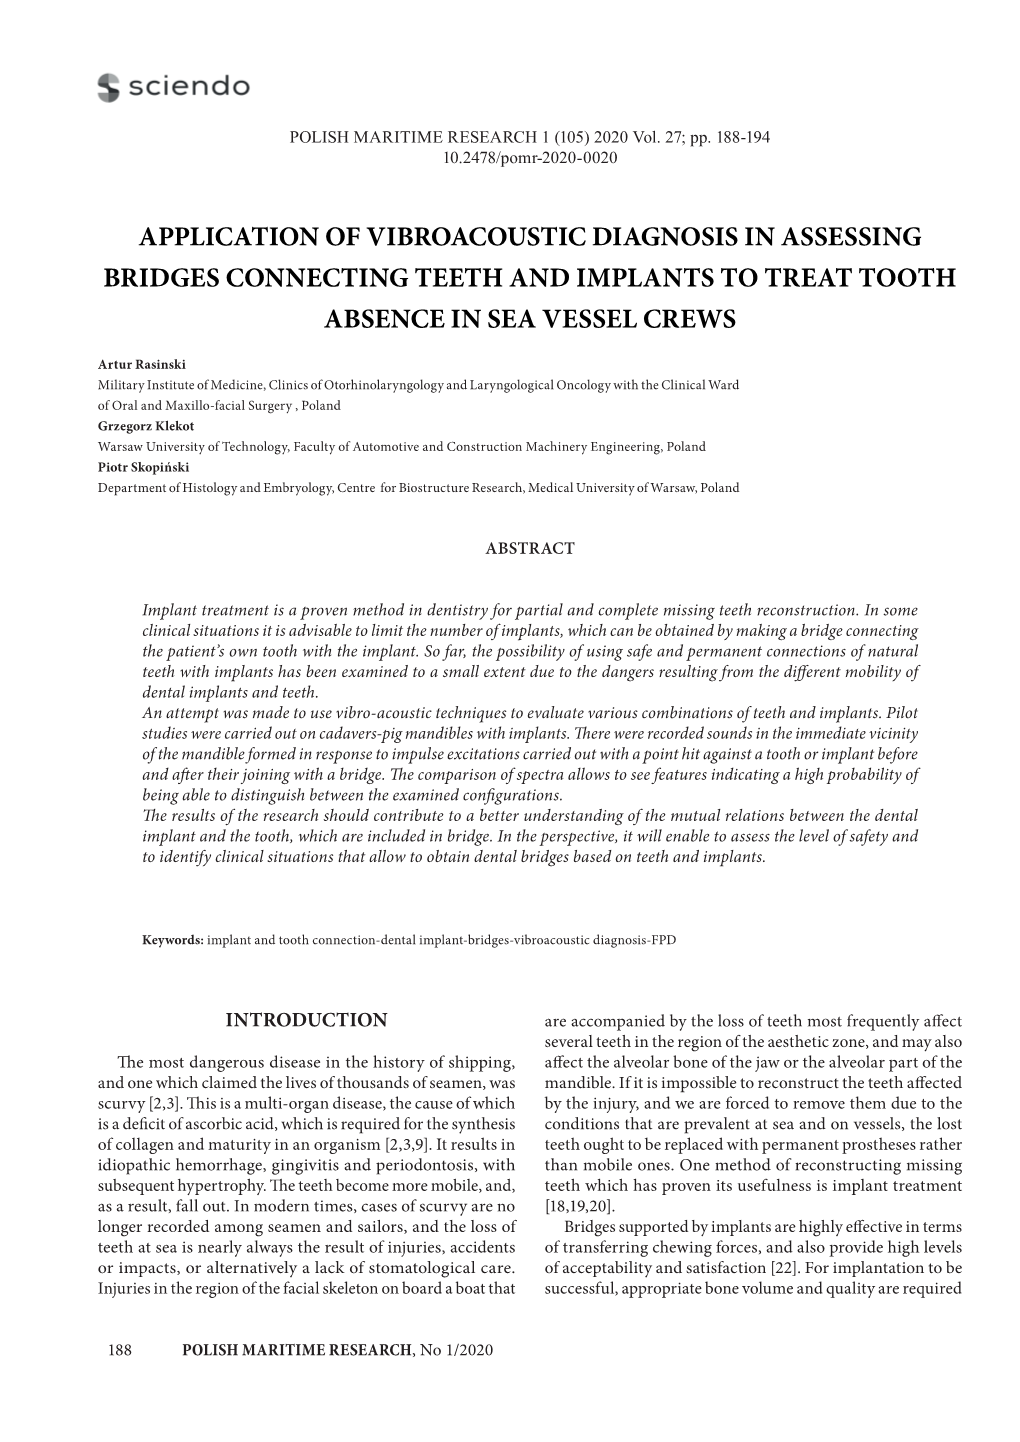 Application of Vibroacoustic Diagnosis in Assessing Bridges Connecting Teeth and Implants to Treat Tooth Absence in Sea Vessel Crews